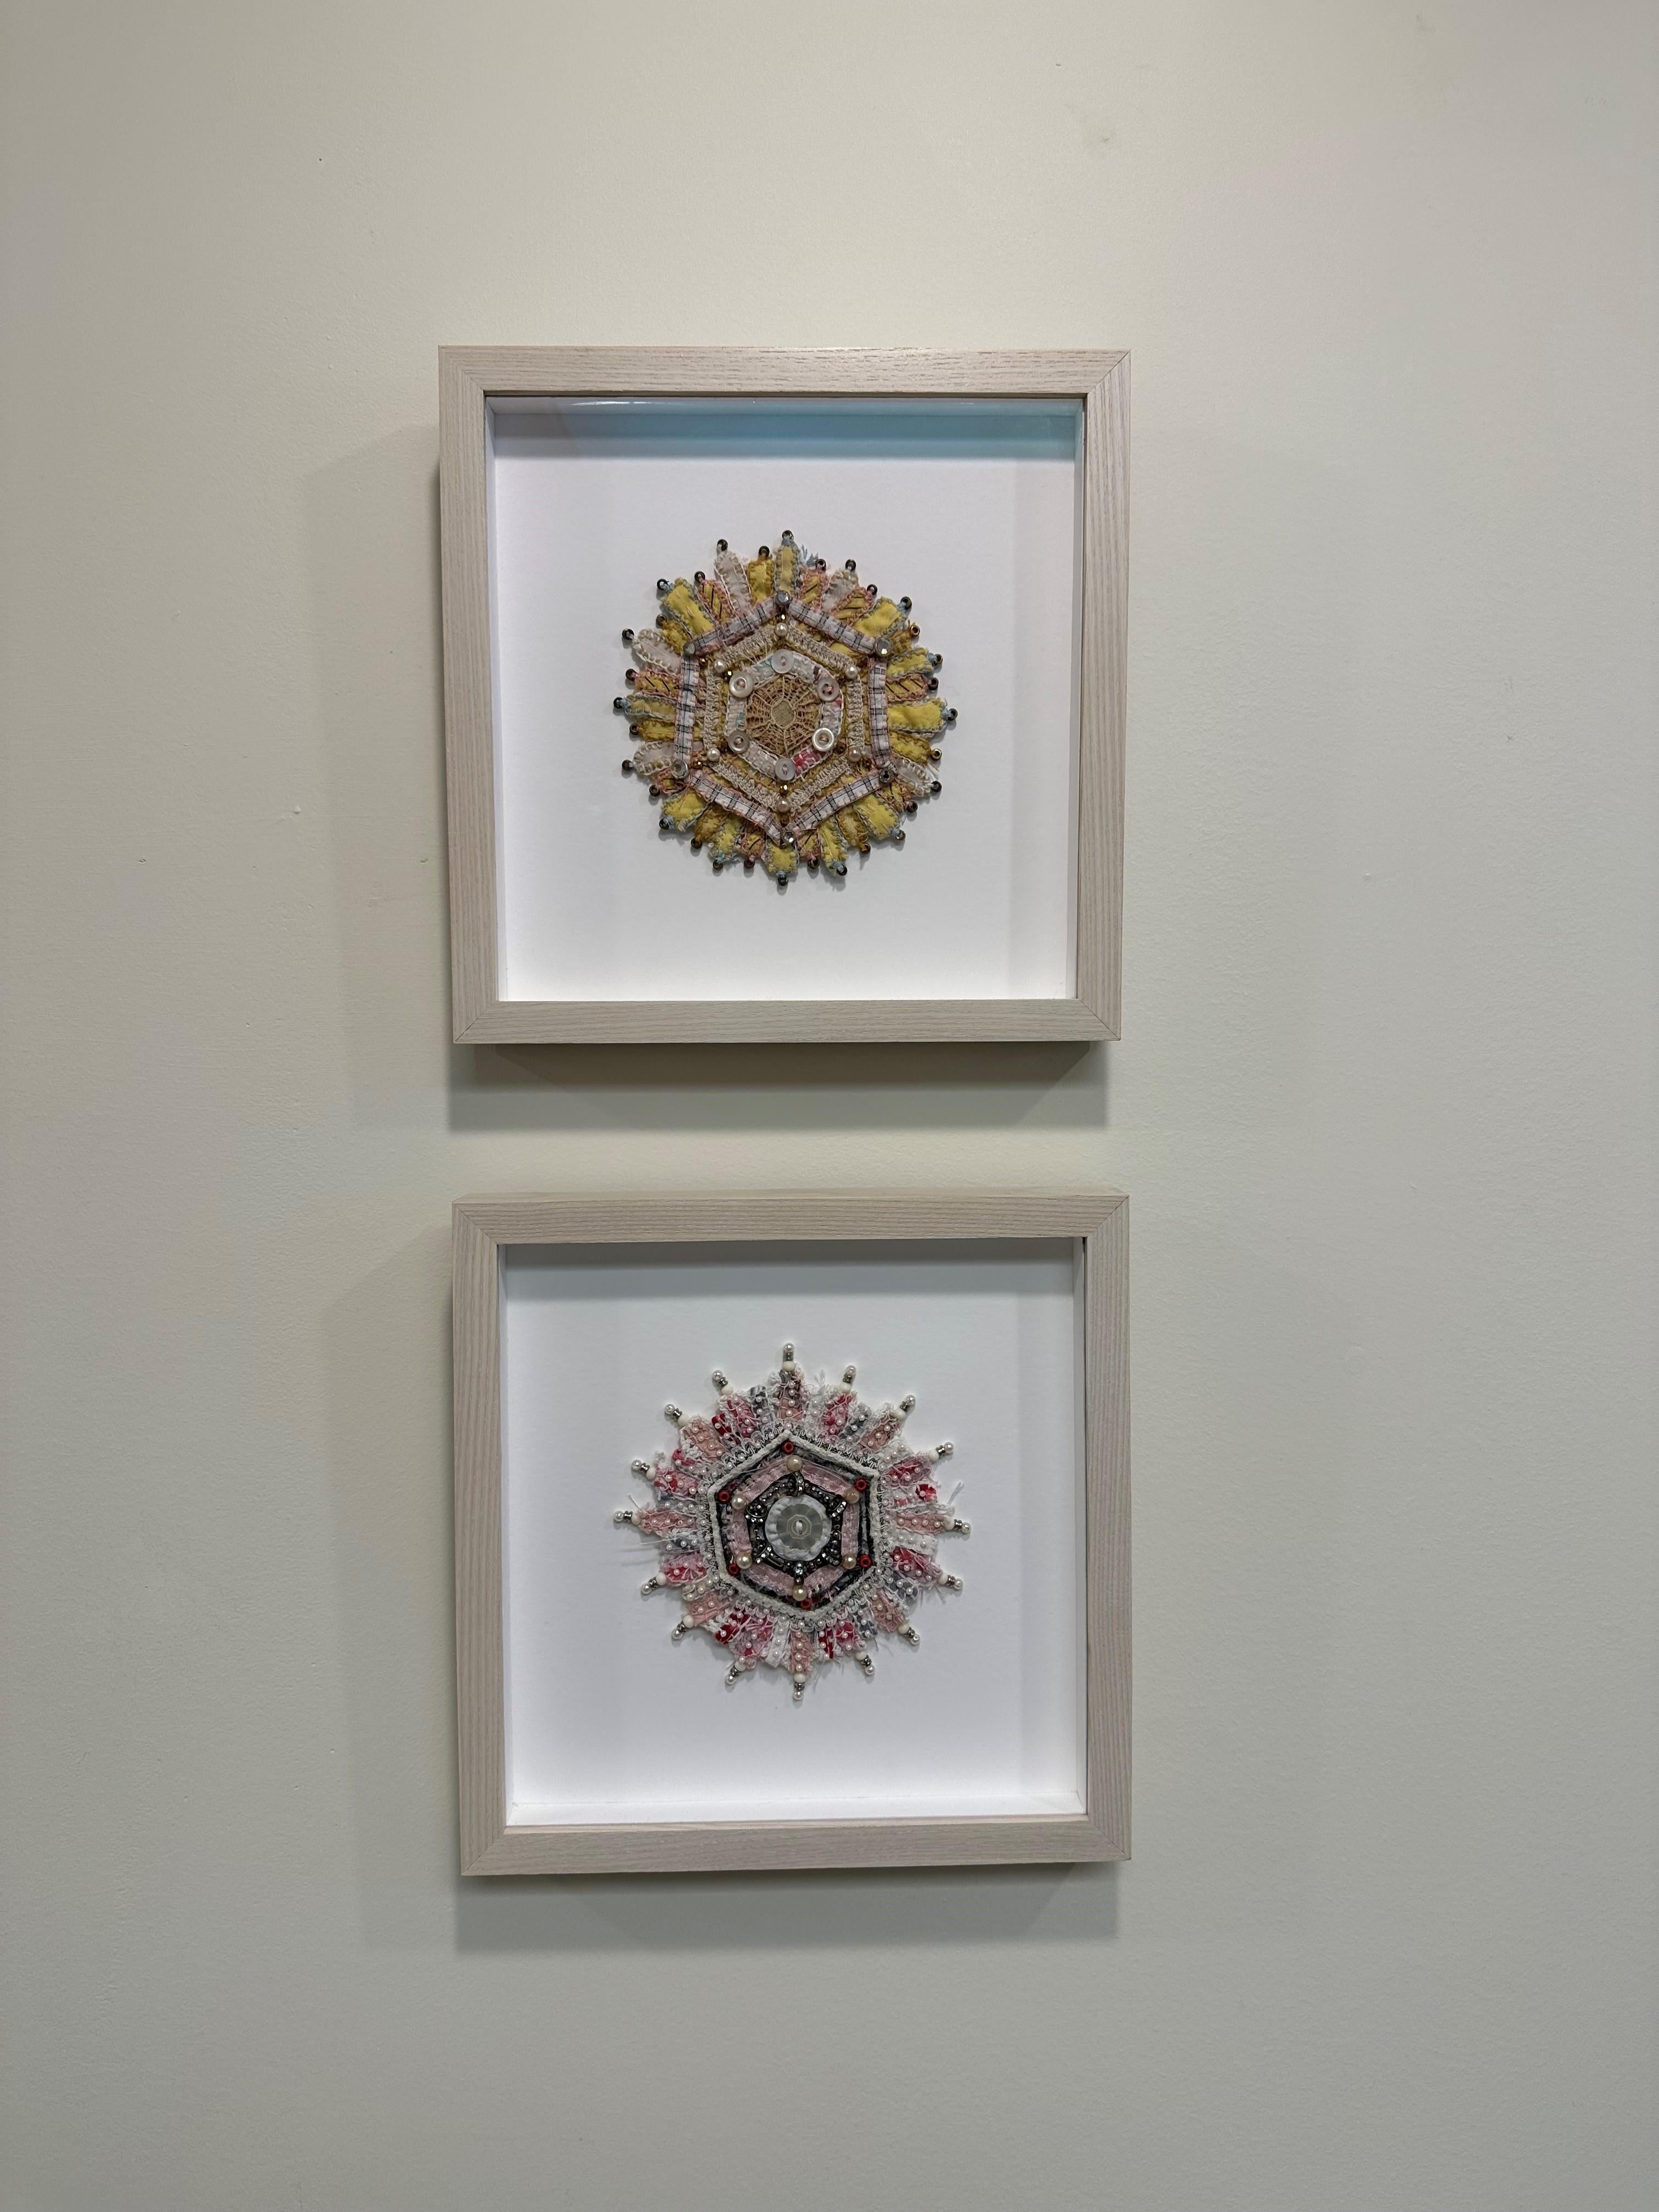 This mixed media mandala by Donna Sharrett contains guitar string ball-ends, clothing, needlework, jewelry, and thread, and is framed in a square 10 x 10 inch light natural wood float frame (5 x 5 inches unframed). 

Rhinestone studded beads and a